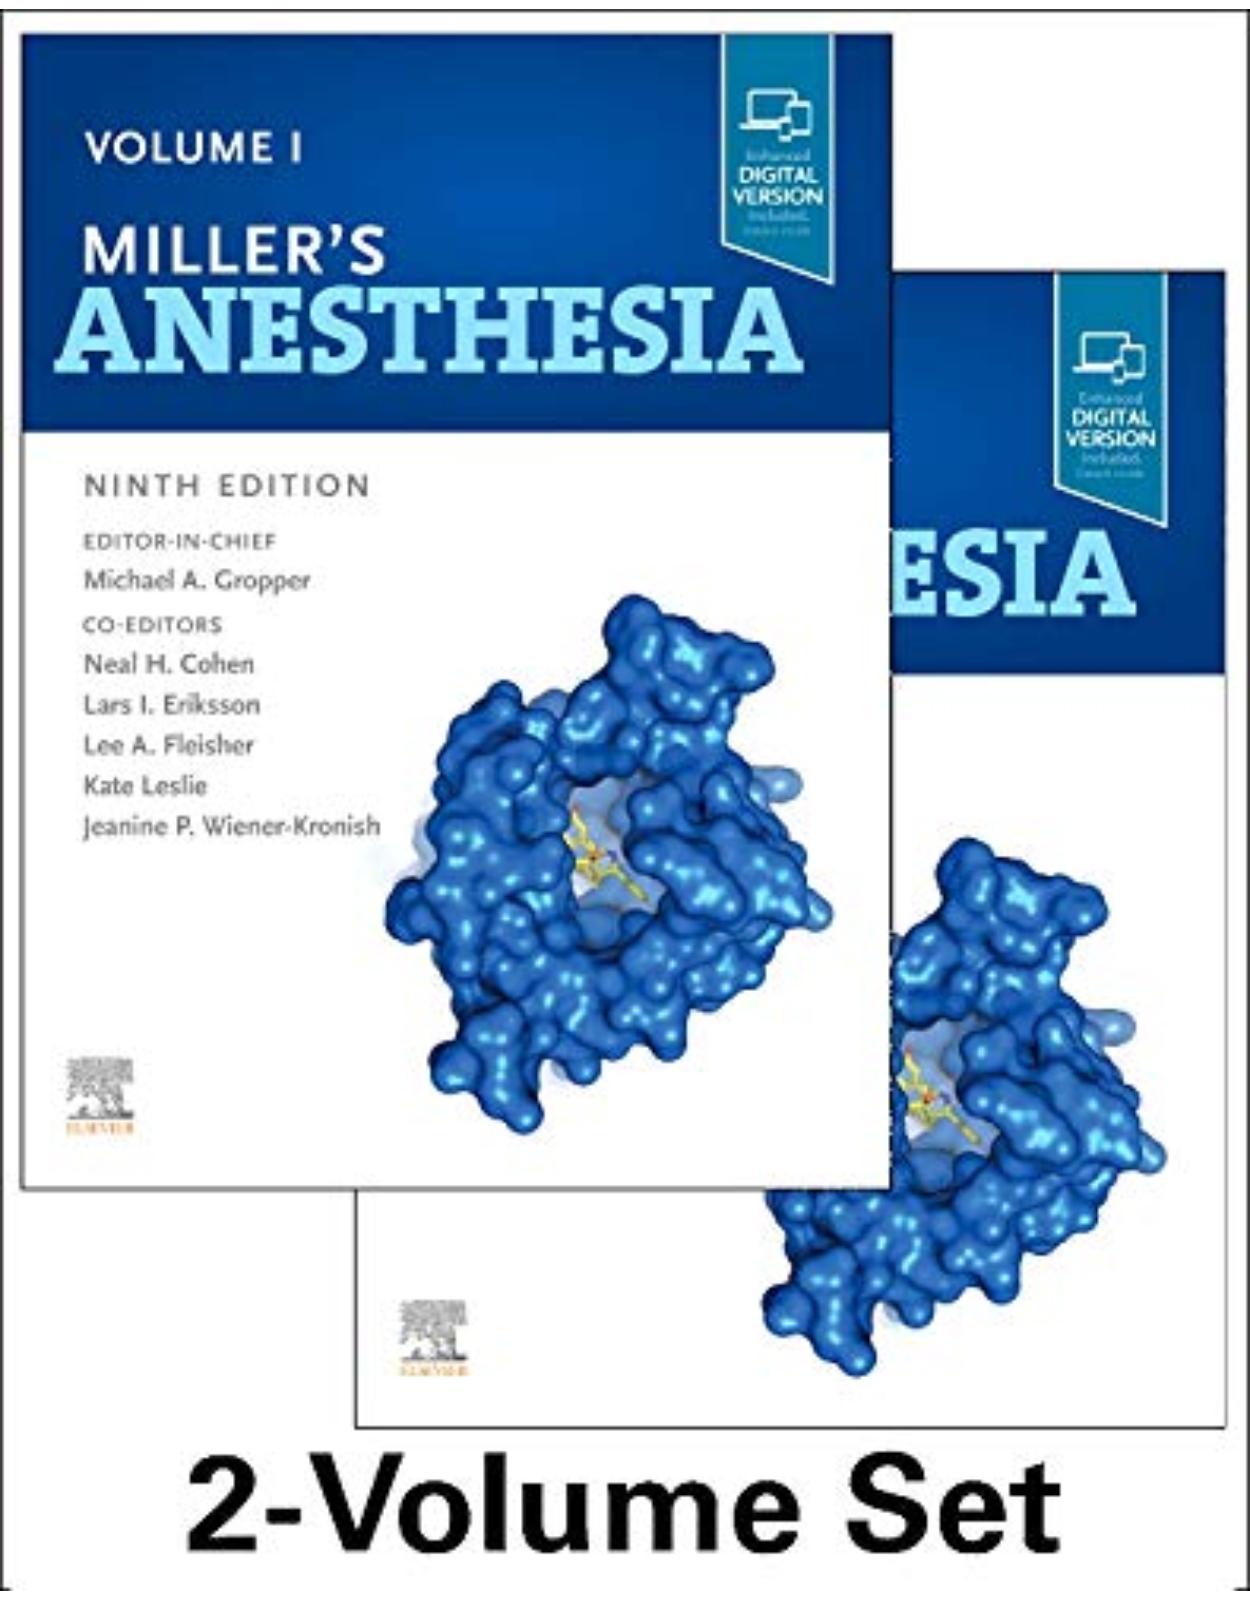 Miller s Anesthesia, 2-Volume Set, 9th Edition 